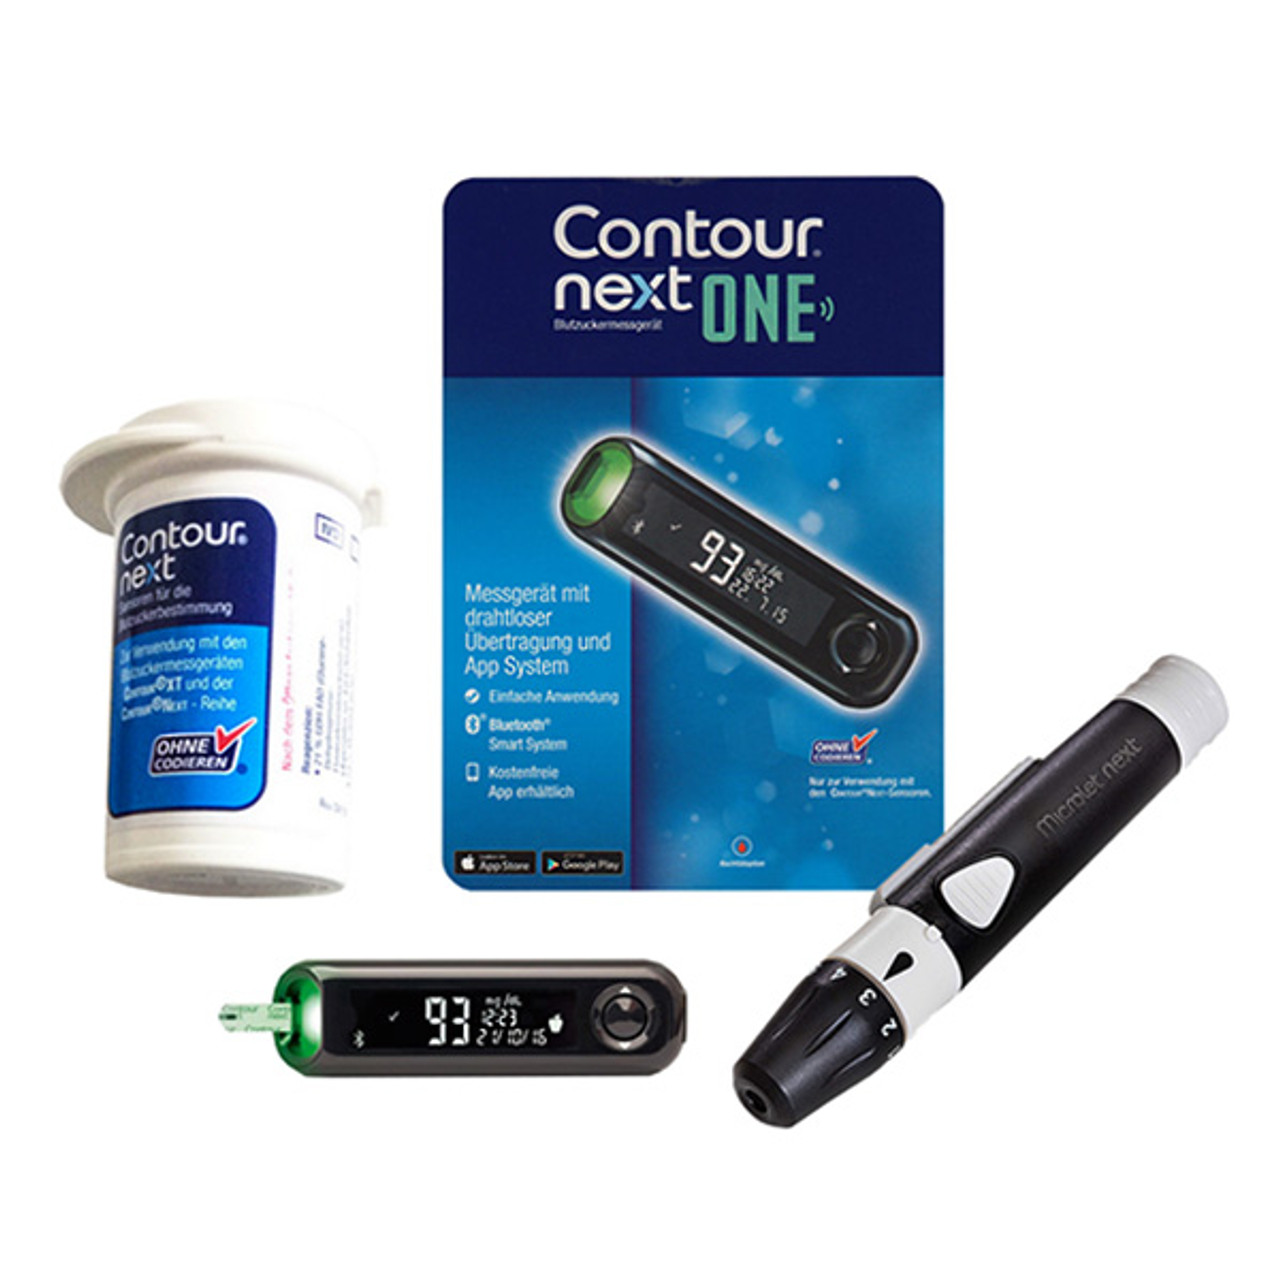 https://cdn11.bigcommerce.com/s-ol3vv5m7u7/images/stencil/1280x1280/products/1385/2420/Contour_Next_ONE_Blood_Glucose_Meter_With_Bluetooth_Lancing__779288670__97968.1543962706.jpg?c=2